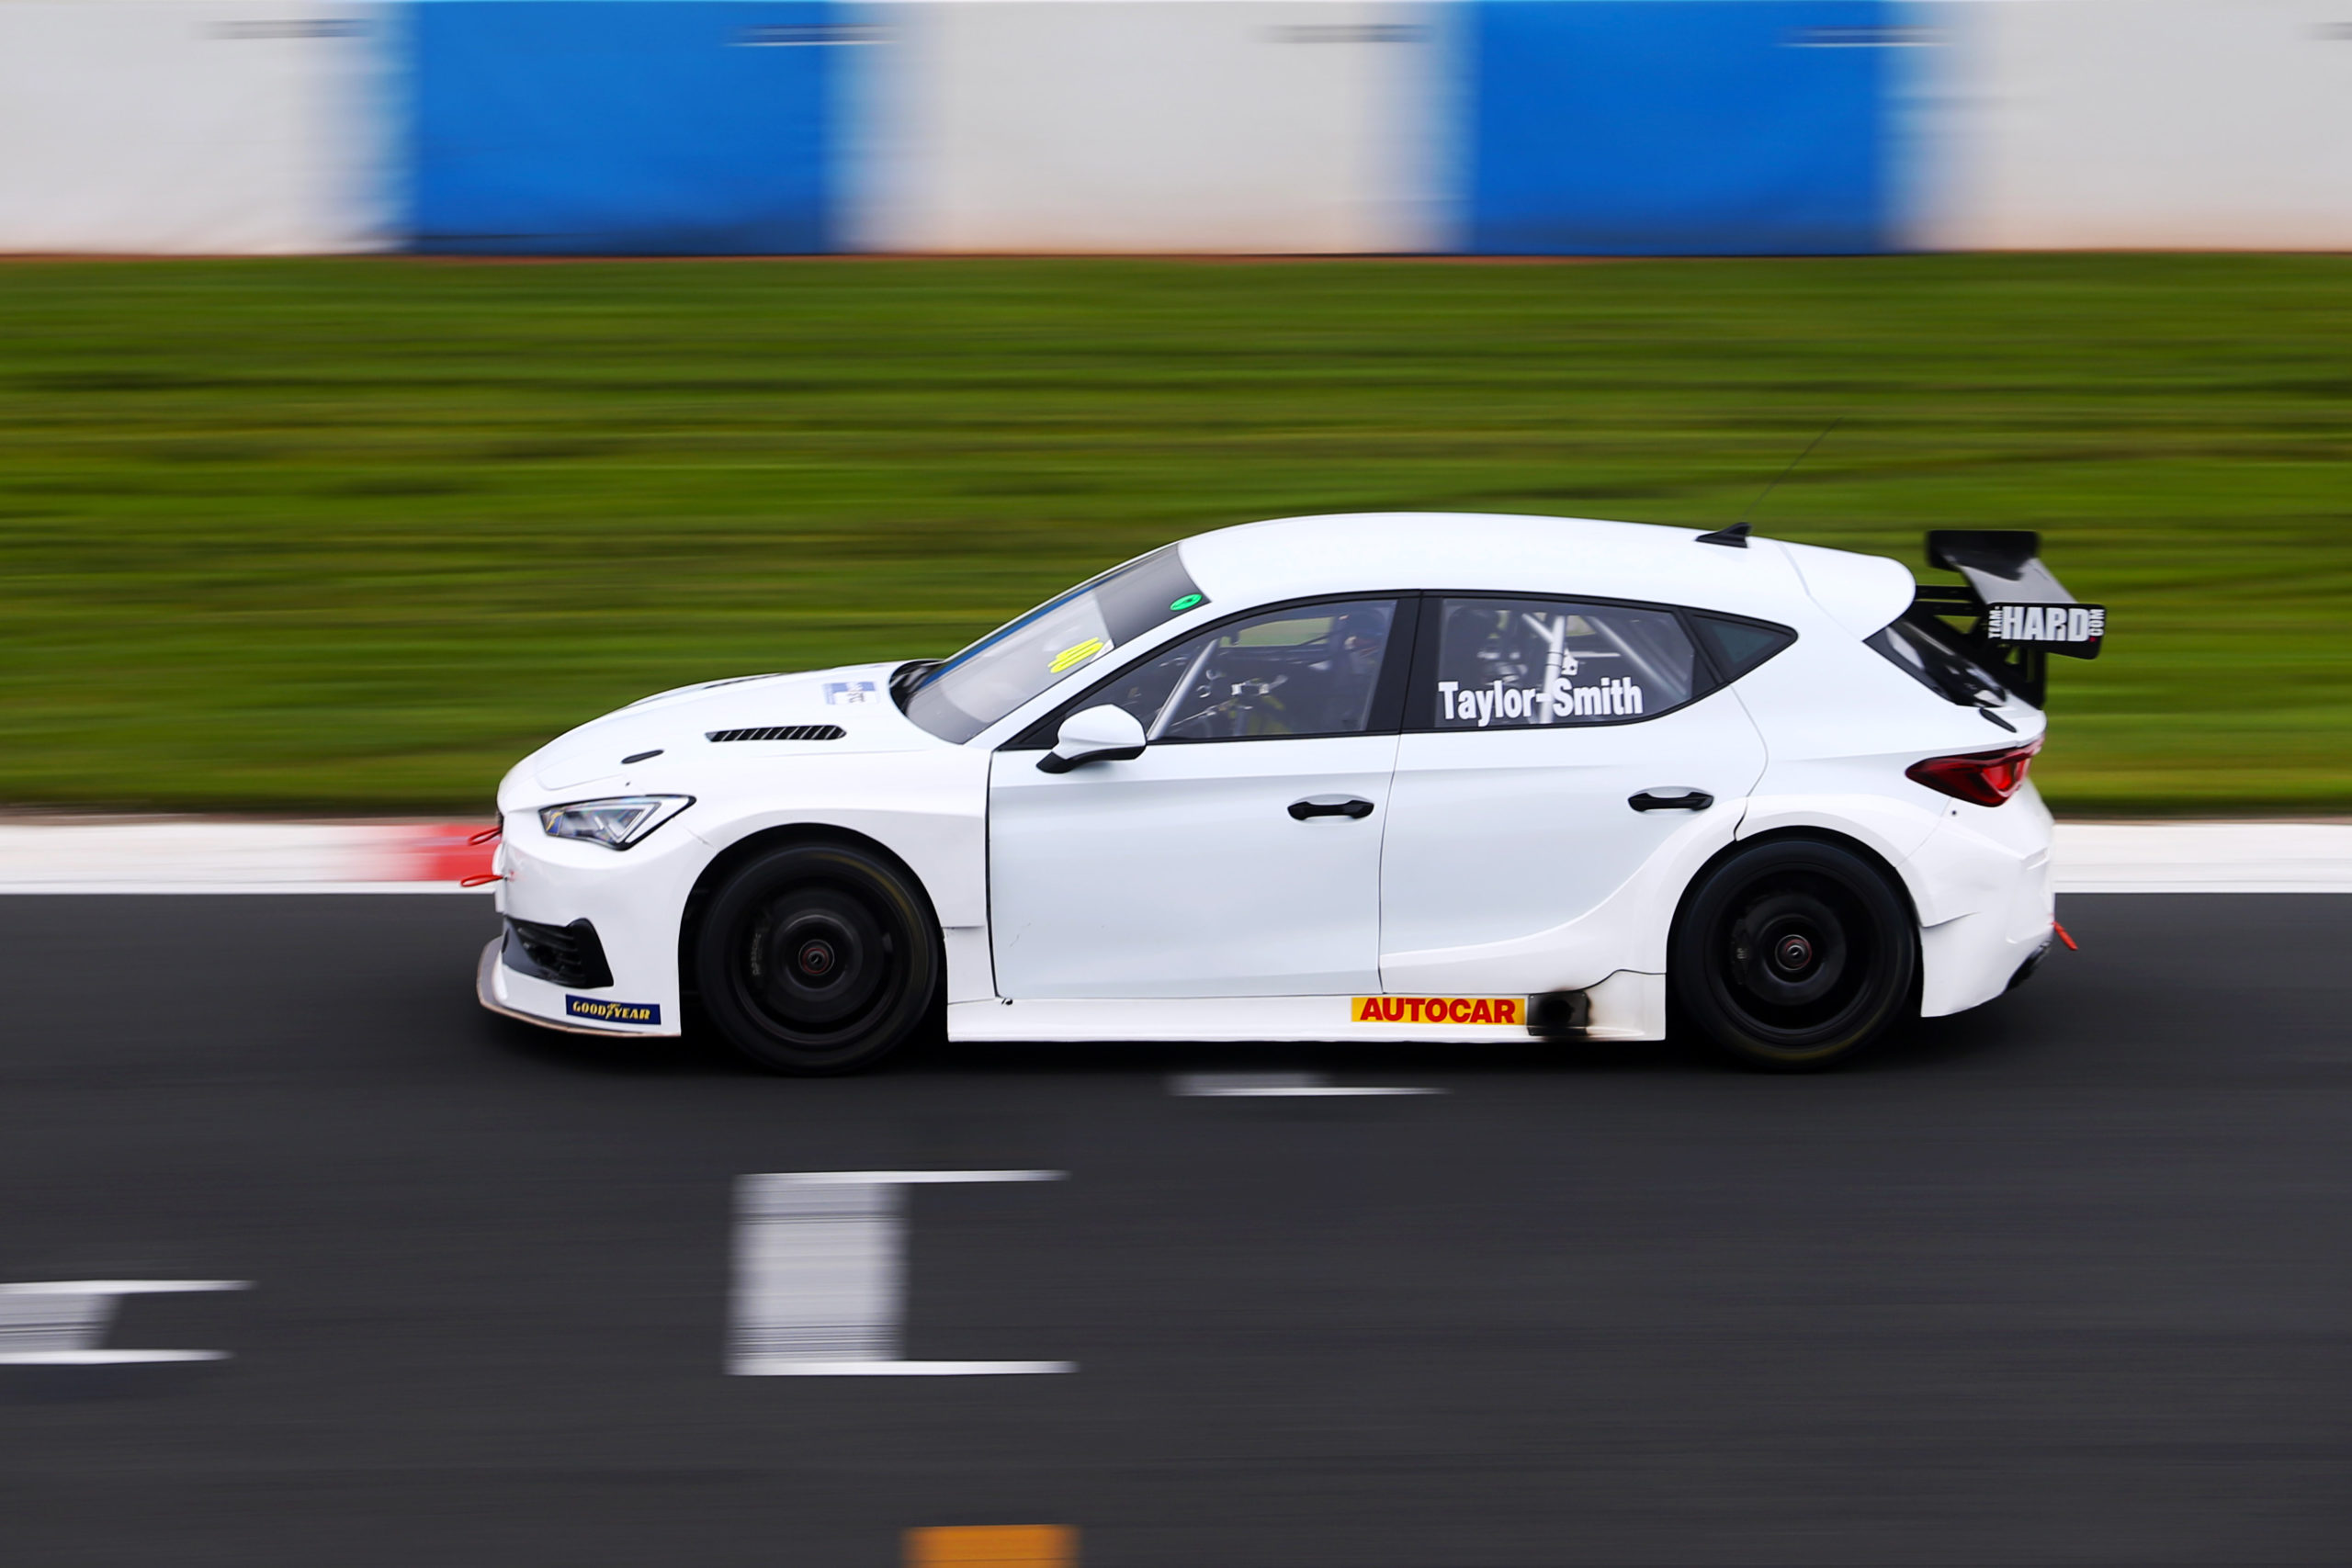 The New Era of the BTCC launches at Donington Park for Taylor-Smith